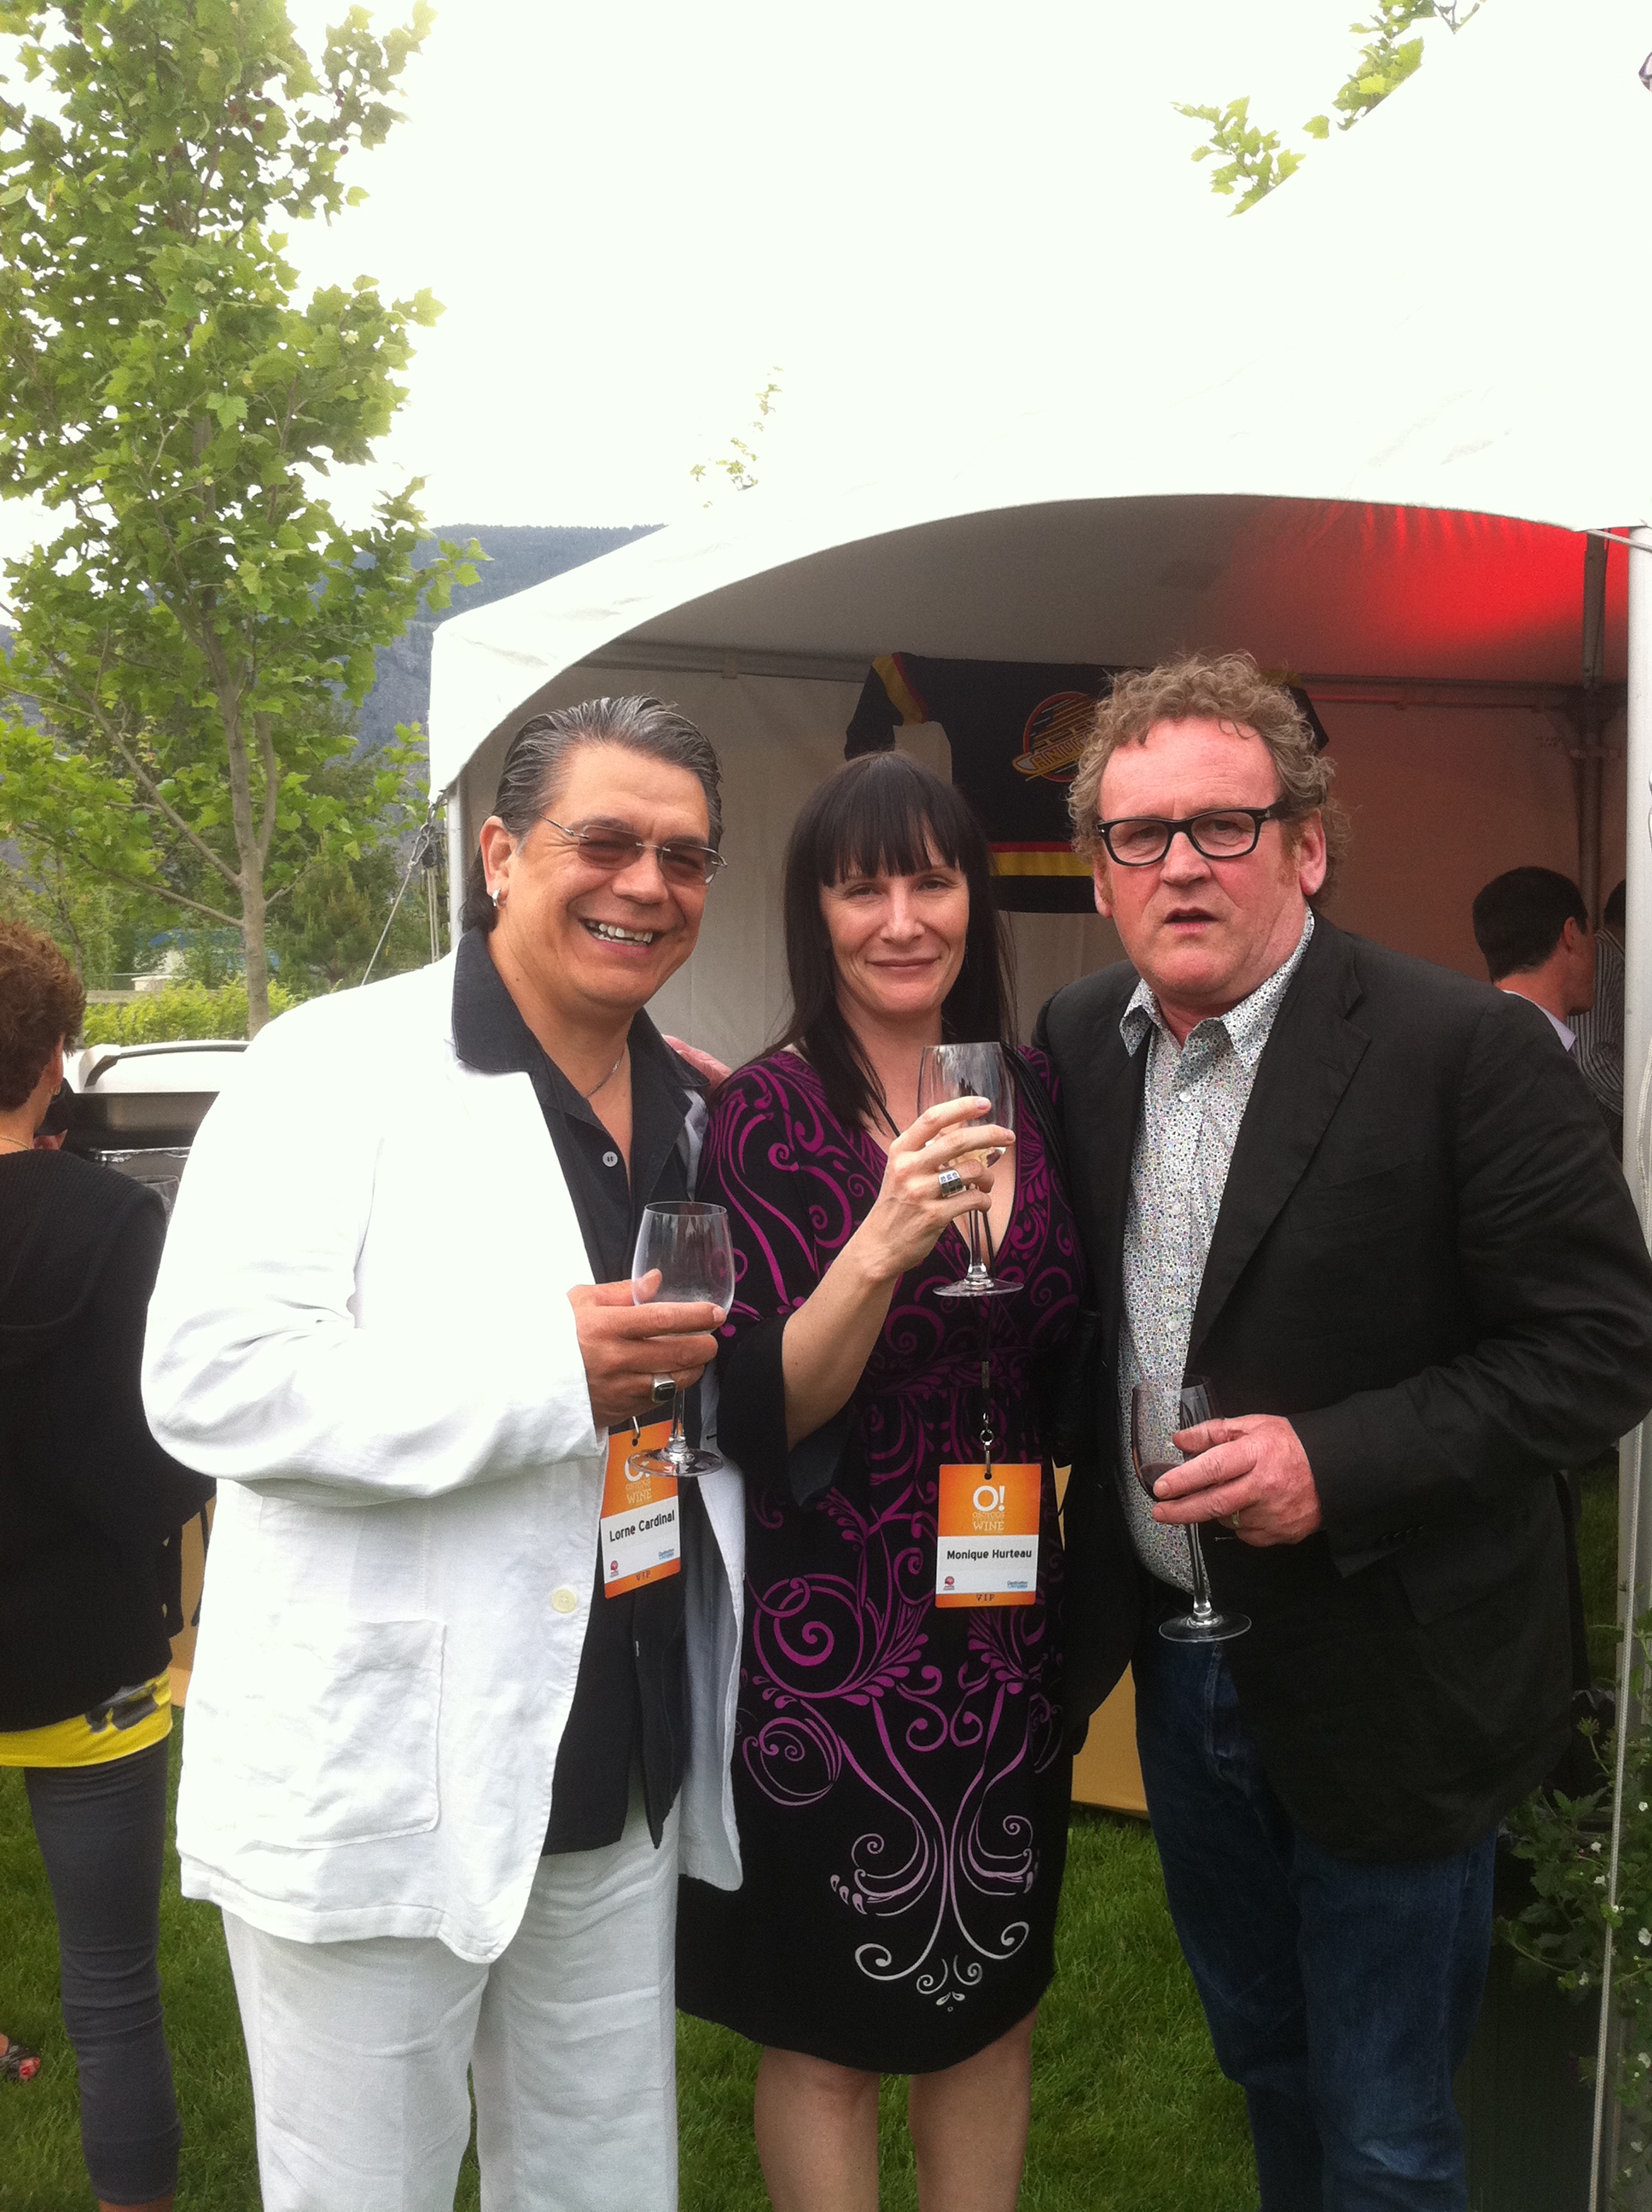 Lorne Cardinal, Monique Hurteau and Colm Meaney at the 2011 Osoyoos Celebrity Wine Festival co-hosted by Jason Priestly & Chad Oakes